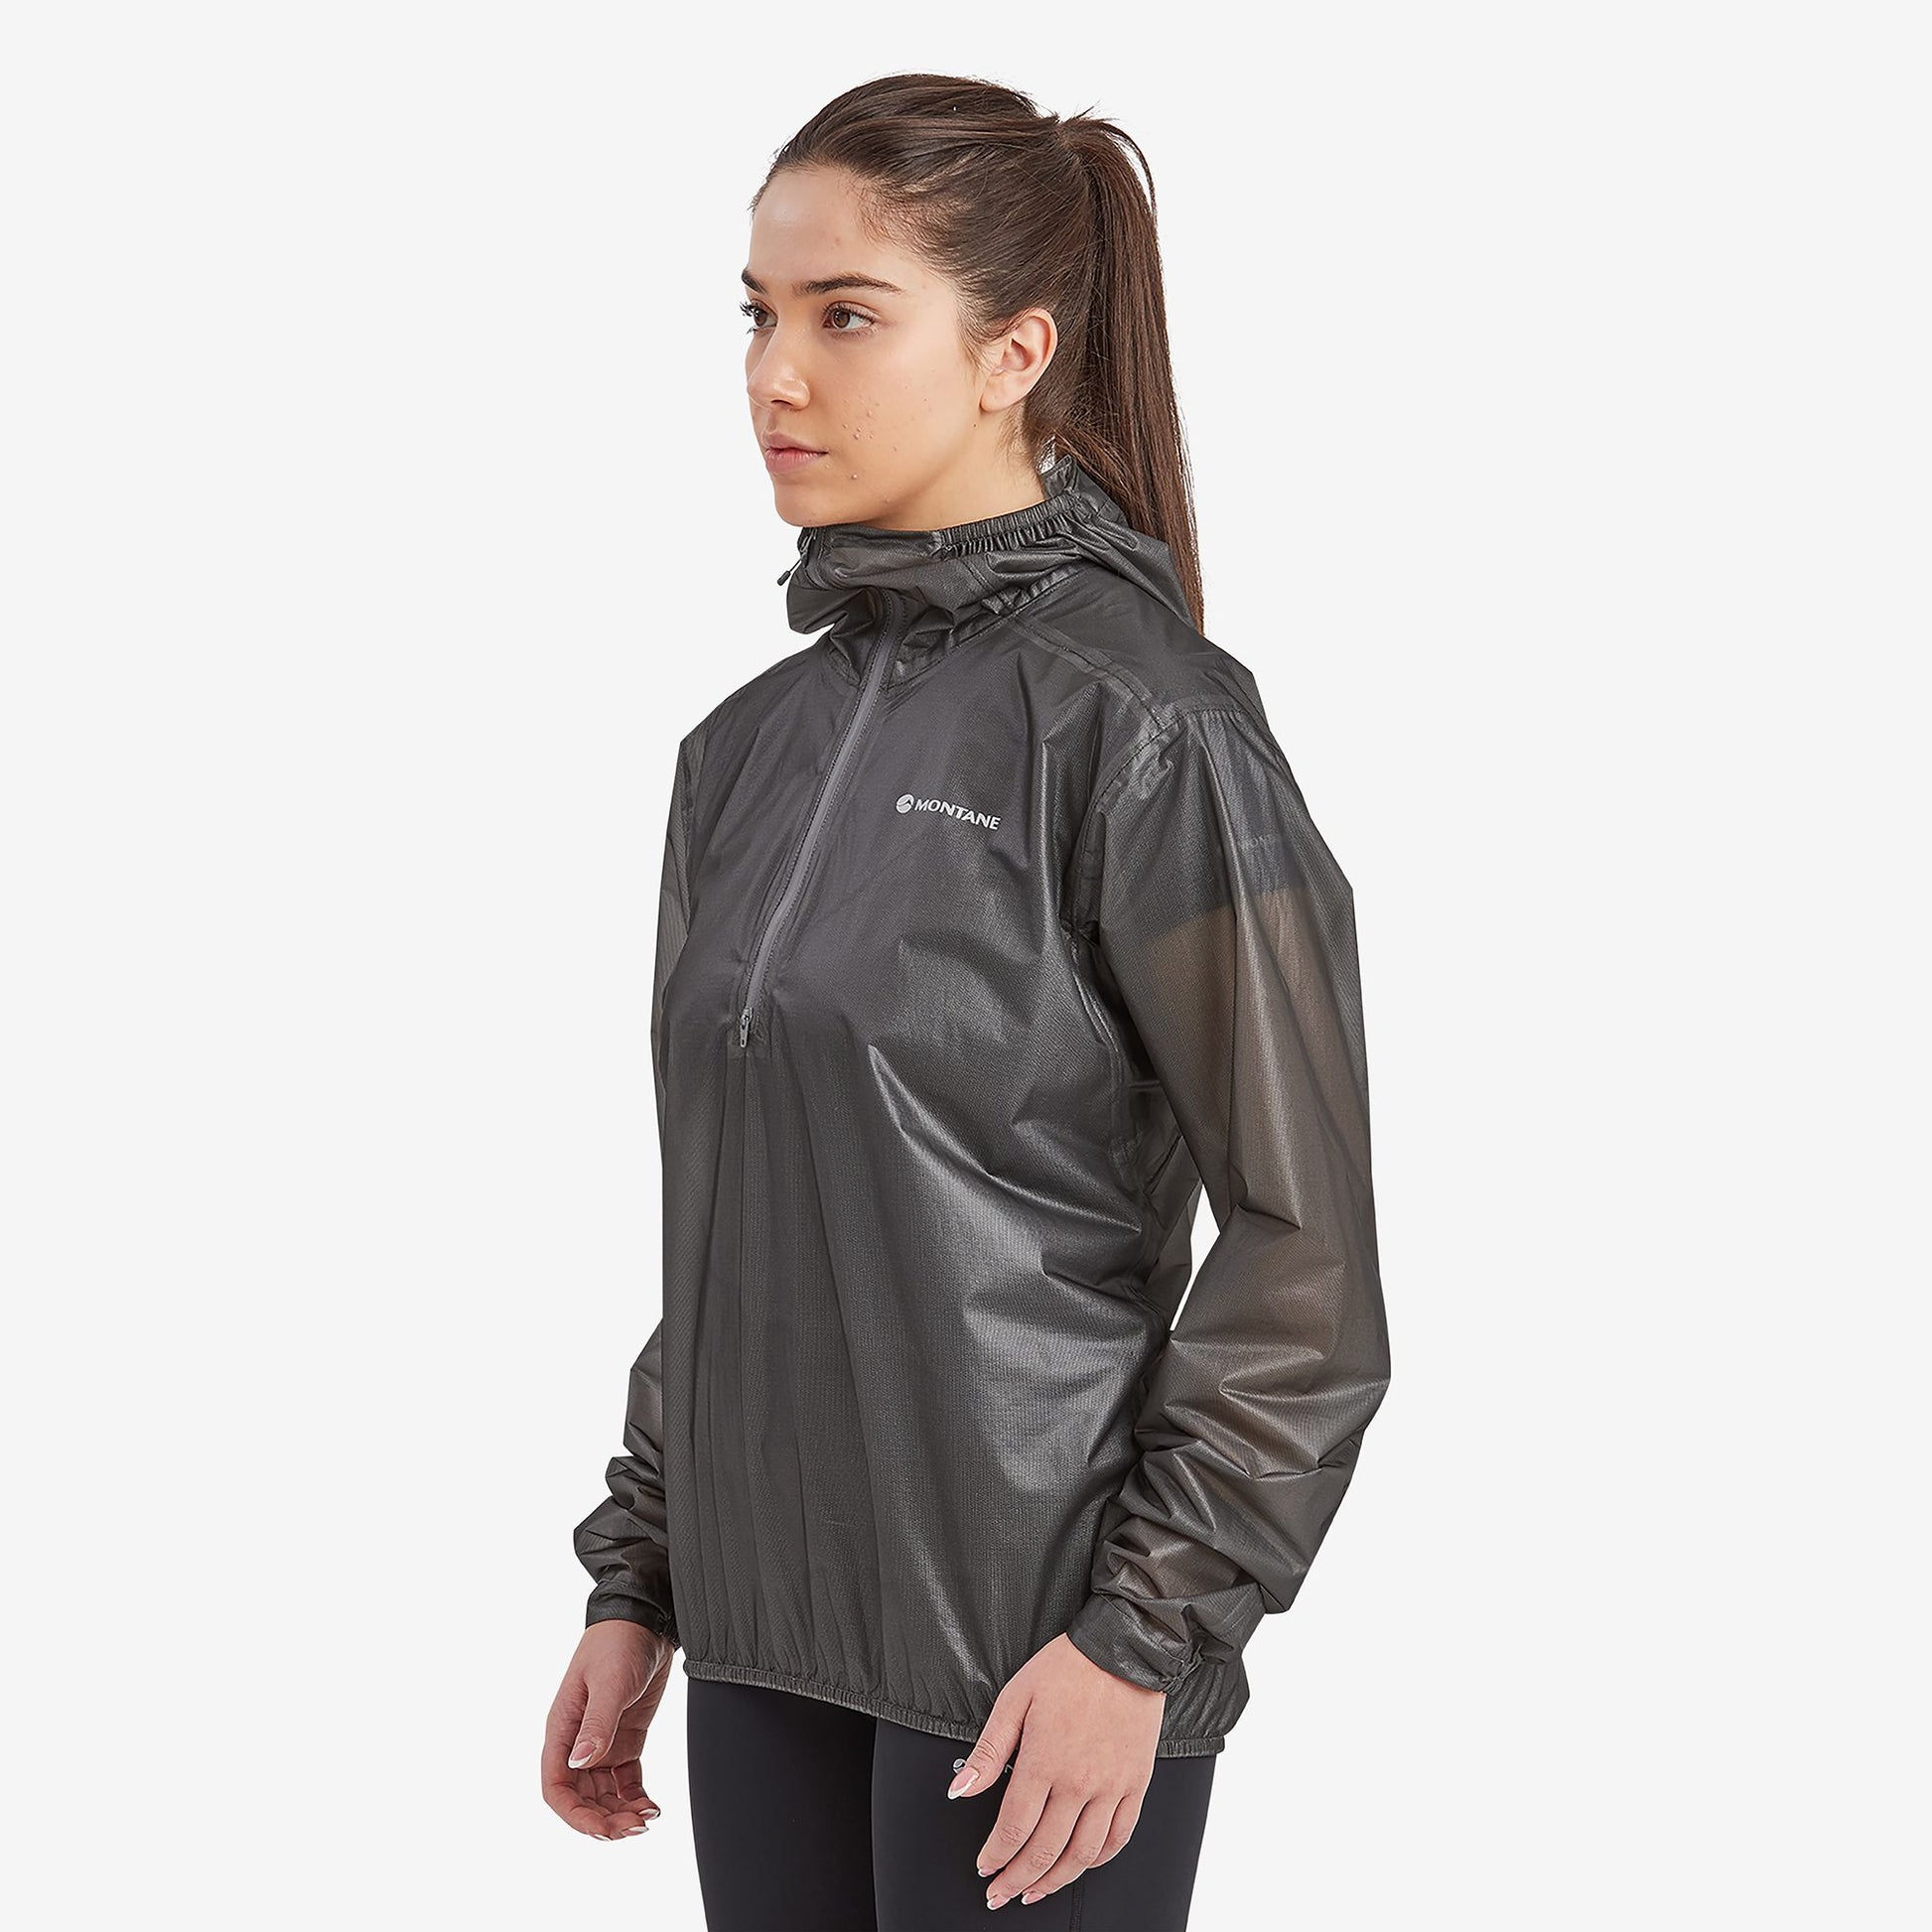 Montane Unisex Minimus Nano Pull-On An extremely lightweight waterproof jacket for running